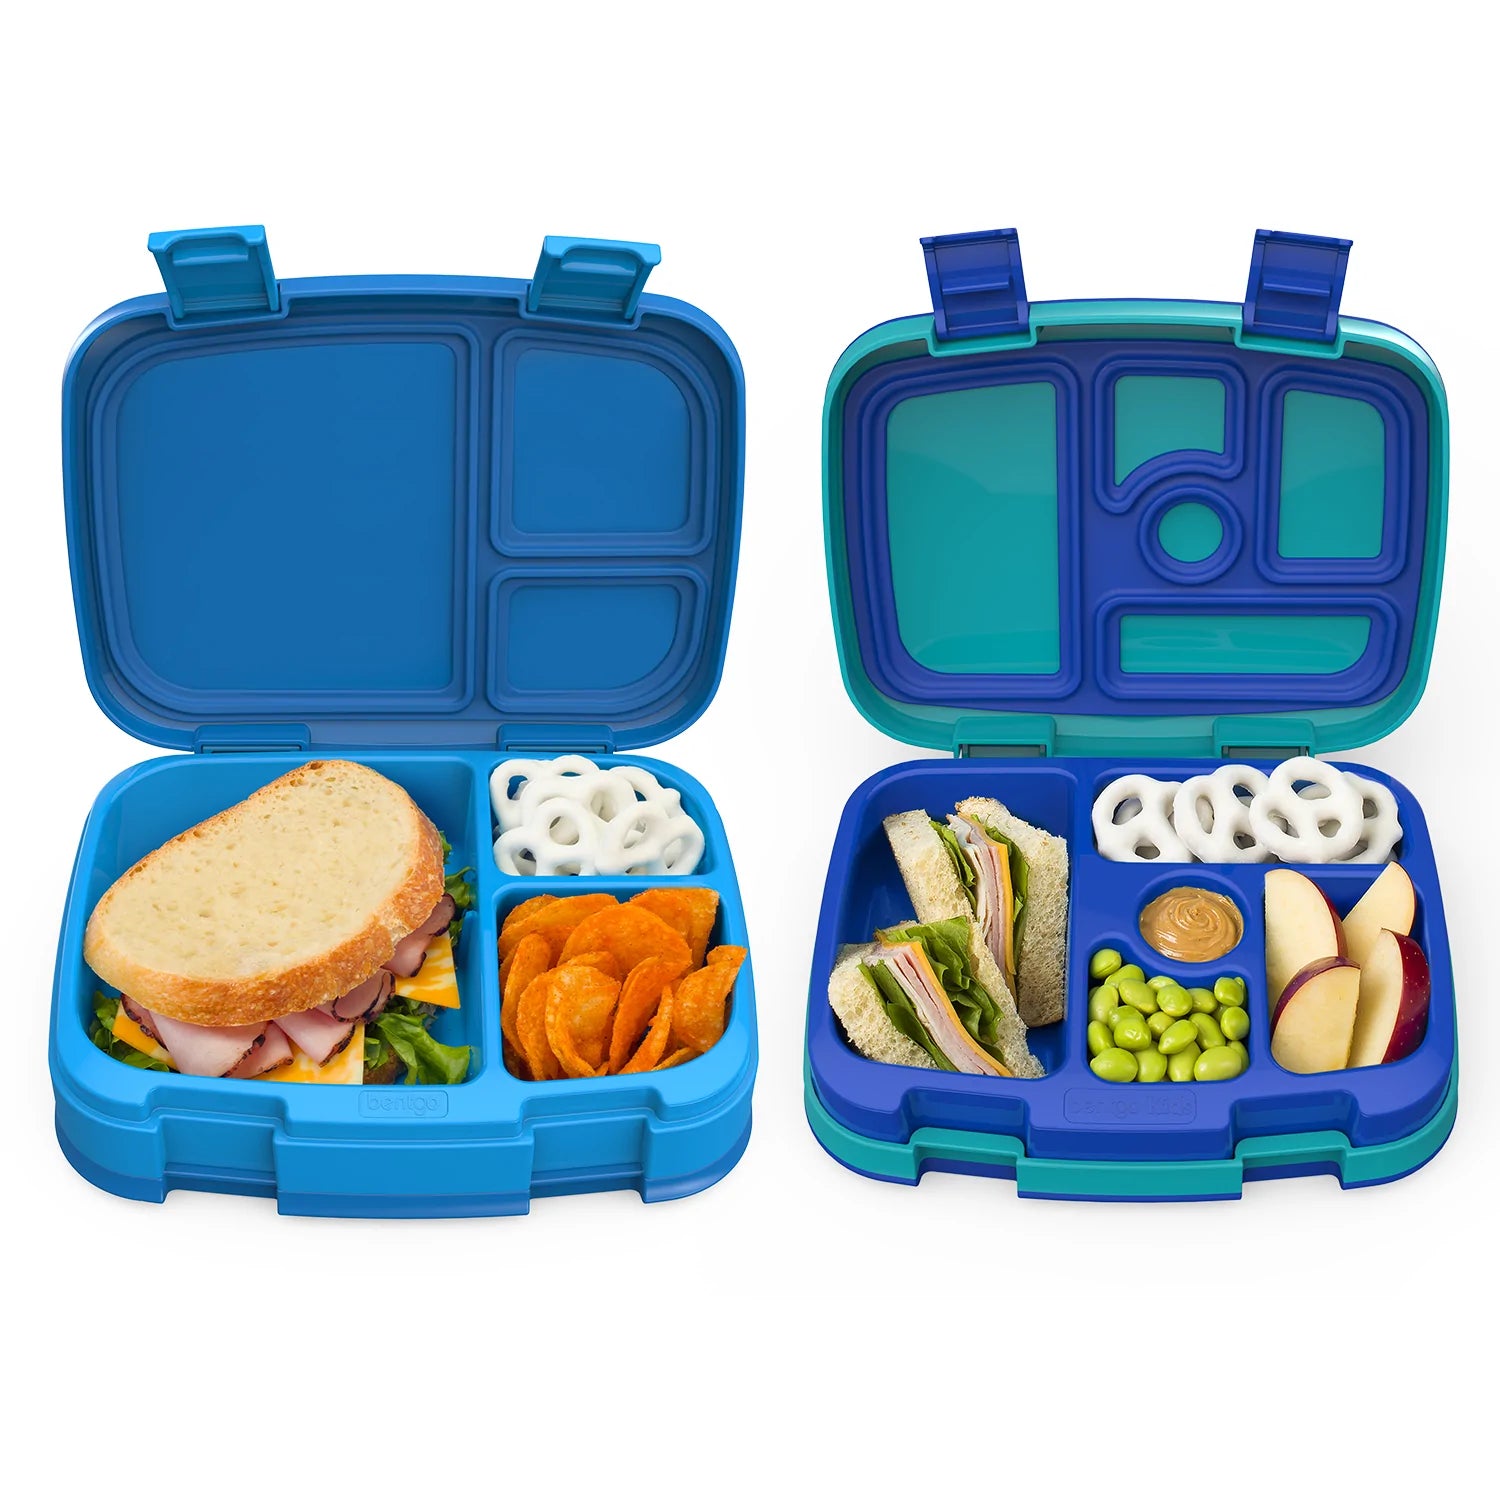 Bentgo Fresh and Kids Lunch Box (2-Pack)